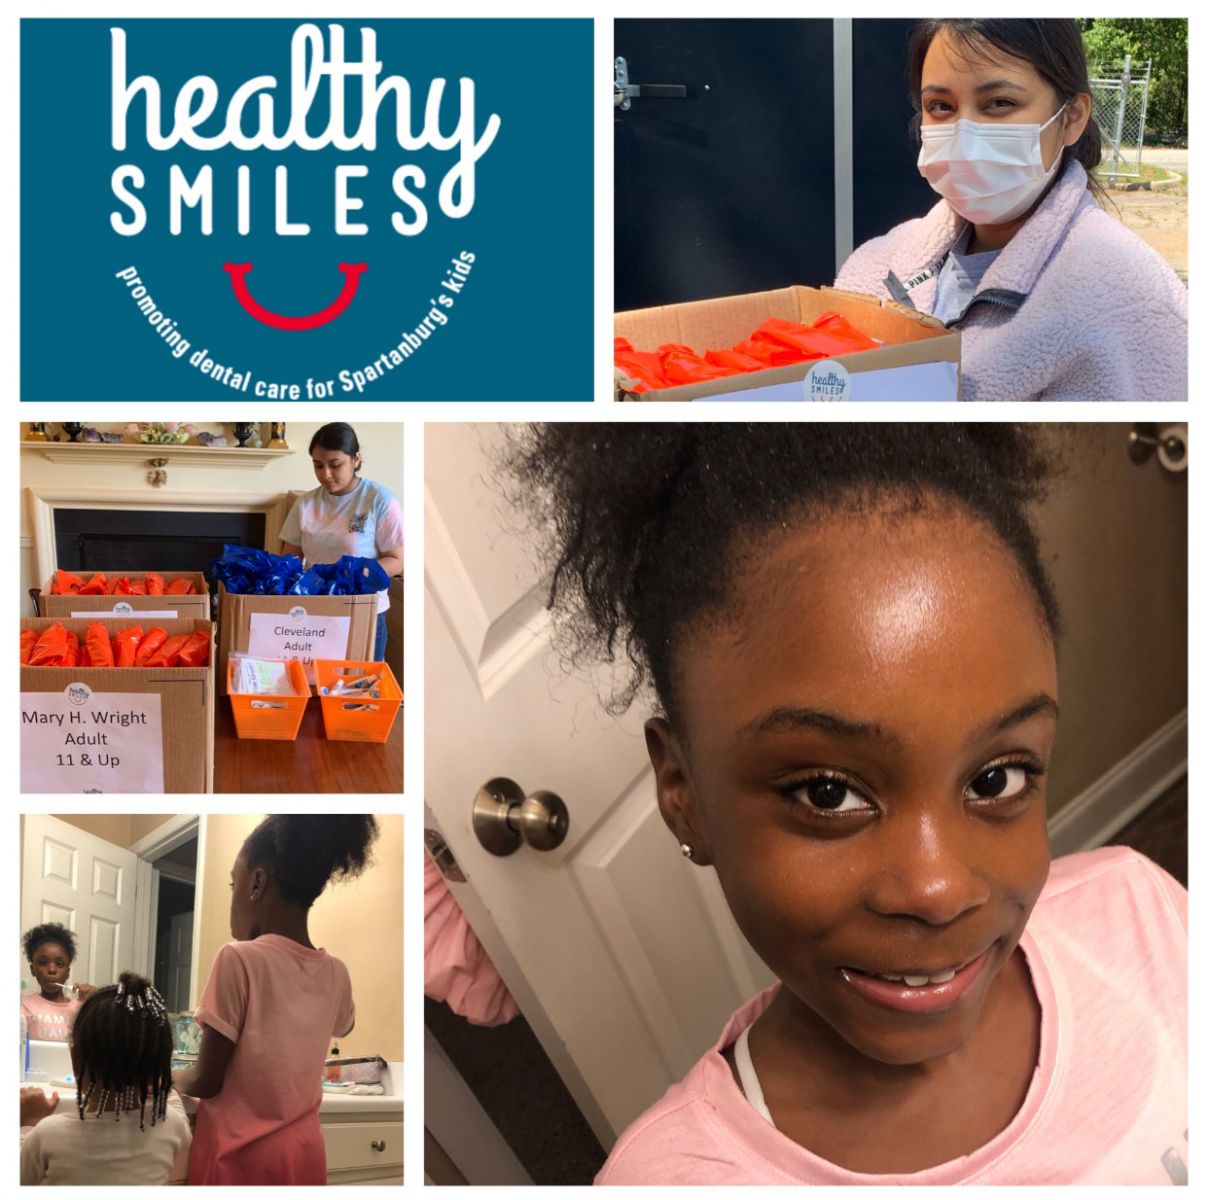 healthy smiles collage from grant award